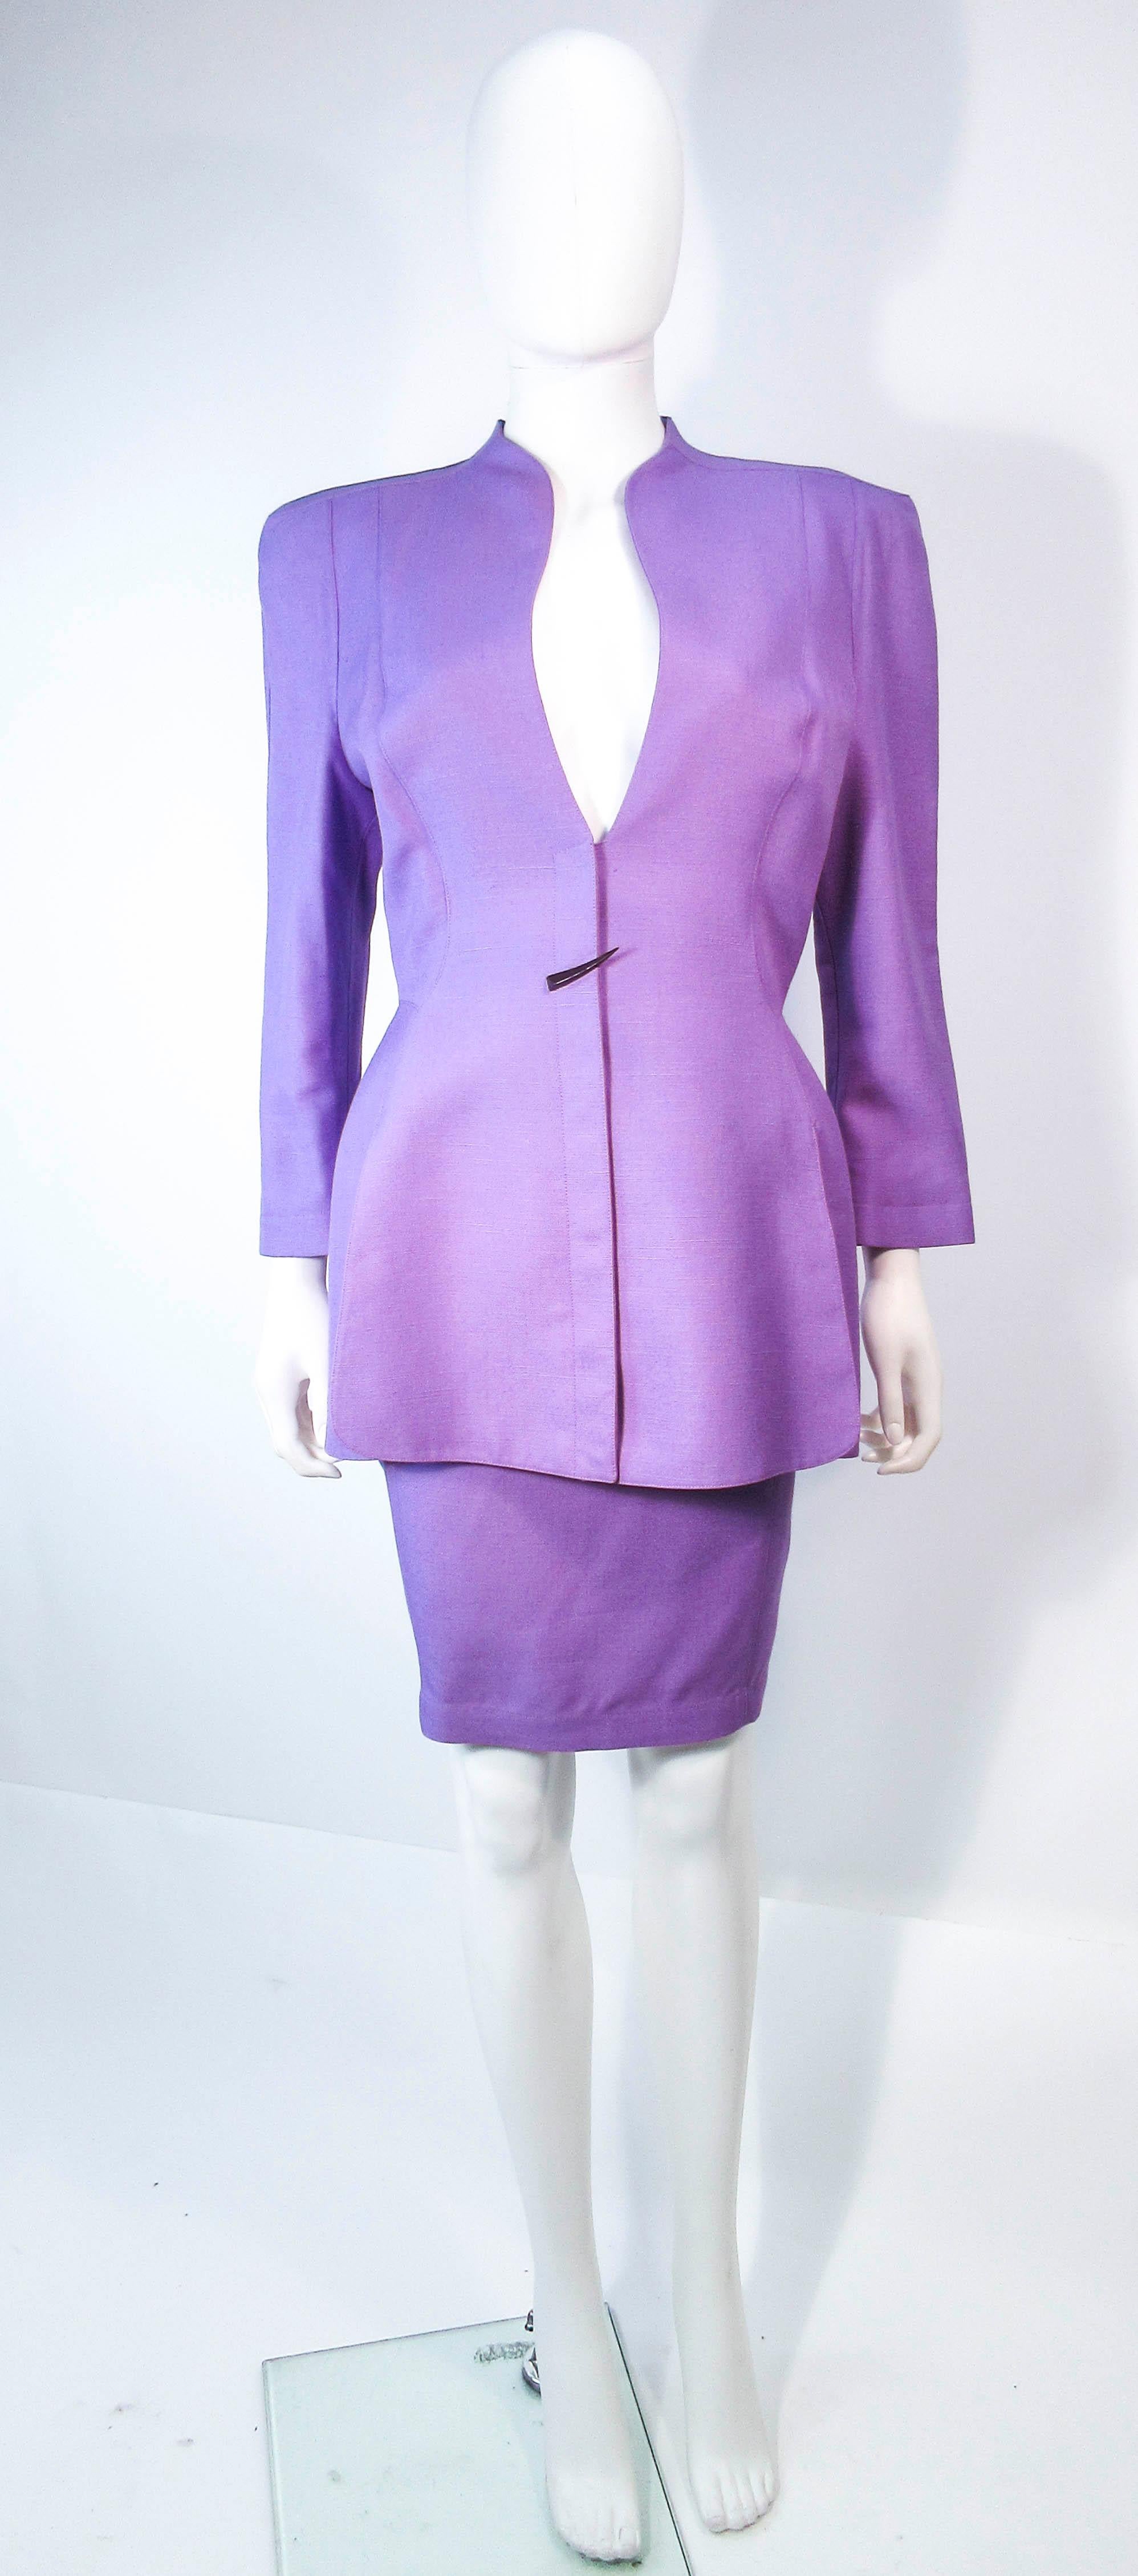  This Thierry Mugler skirt suit is composed of a lavender/purple hue fabric. Features a classic Mugler silhouette with nipped waist and curved bust-line to neckline design. The classic pencil style skirt features a zipper closure. In good vintage